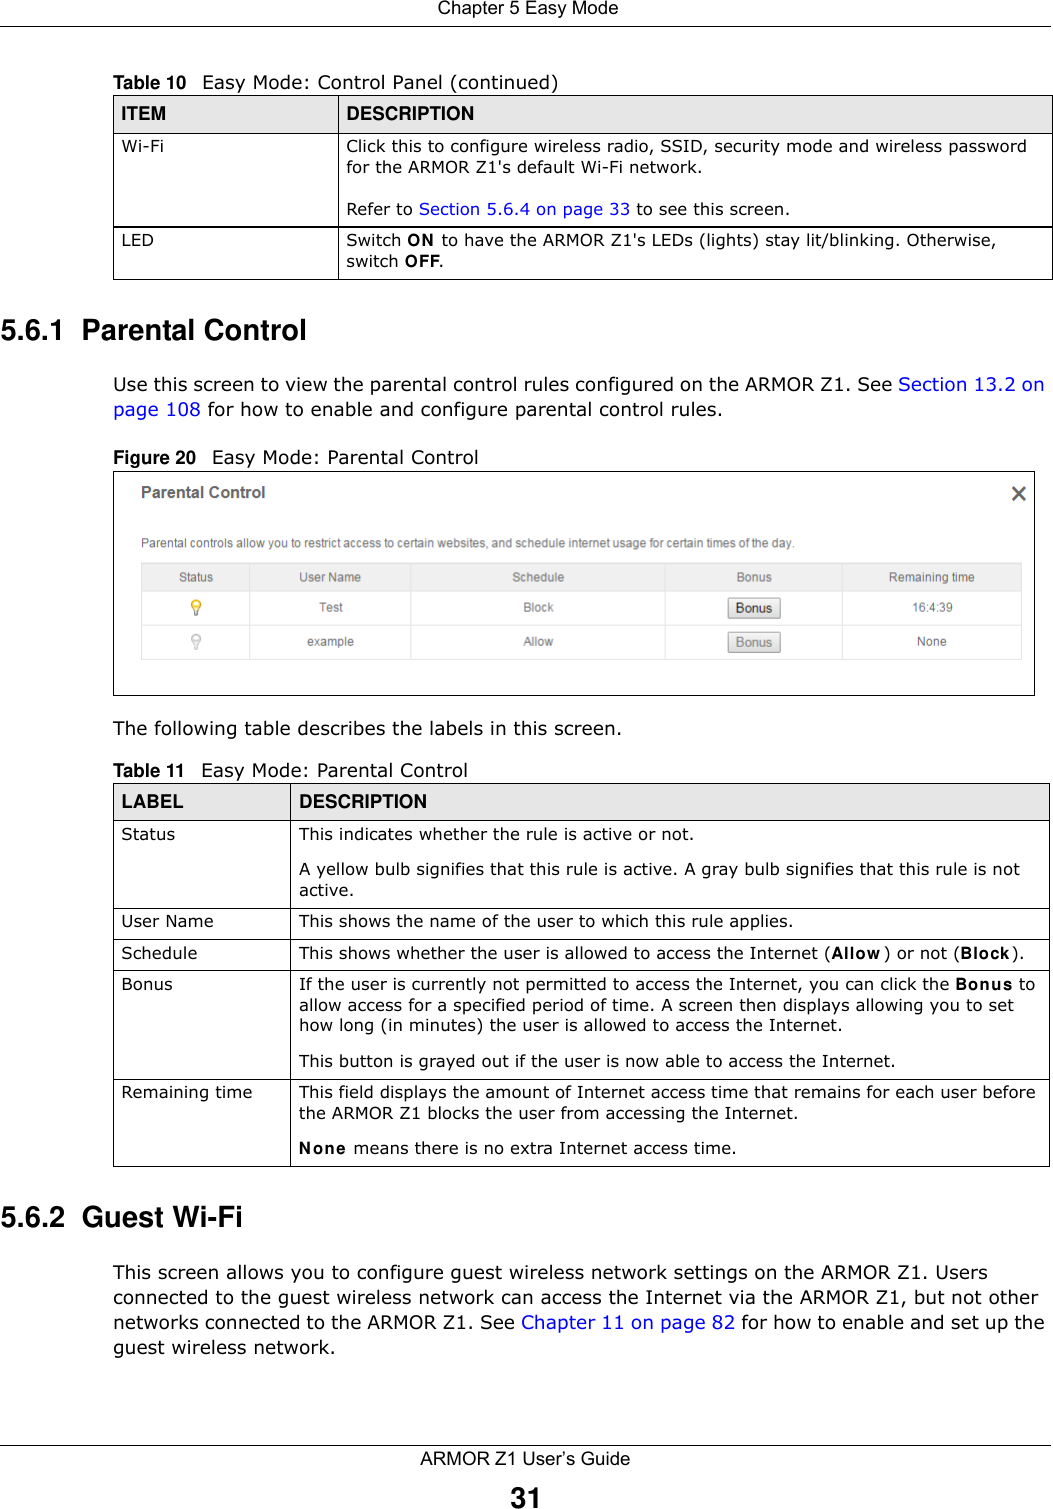  Chapter 5 Easy ModeARMOR Z1 User’s Guide315.6.1  Parental ControlUse this screen to view the parental control rules configured on the ARMOR Z1. See Section 13.2 on page 108 for how to enable and configure parental control rules.Figure 20   Easy Mode: Parental Control The following table describes the labels in this screen.5.6.2  Guest Wi-FiThis screen allows you to configure guest wireless network settings on the ARMOR Z1. Users connected to the guest wireless network can access the Internet via the ARMOR Z1, but not other networks connected to the ARMOR Z1. See Chapter 11 on page 82 for how to enable and set up the guest wireless network.Wi-Fi Click this to configure wireless radio, SSID, security mode and wireless password for the ARMOR Z1&apos;s default Wi-Fi network.Refer to Section 5.6.4 on page 33 to see this screen.LED Switch ON to have the ARMOR Z1&apos;s LEDs (lights) stay lit/blinking. Otherwise, switch OFF.Table 10   Easy Mode: Control Panel (continued)ITEM DESCRIPTIONTable 11   Easy Mode: Parental ControlLABEL DESCRIPTIONStatus This indicates whether the rule is active or not.A yellow bulb signifies that this rule is active. A gray bulb signifies that this rule is not active.User Name This shows the name of the user to which this rule applies.Schedule This shows whether the user is allowed to access the Internet (Allow) or not (Block). Bonus If the user is currently not permitted to access the Internet, you can click the Bonus to allow access for a specified period of time. A screen then displays allowing you to set how long (in minutes) the user is allowed to access the Internet.This button is grayed out if the user is now able to access the Internet.Remaining time  This field displays the amount of Internet access time that remains for each user before the ARMOR Z1 blocks the user from accessing the Internet.None means there is no extra Internet access time. 